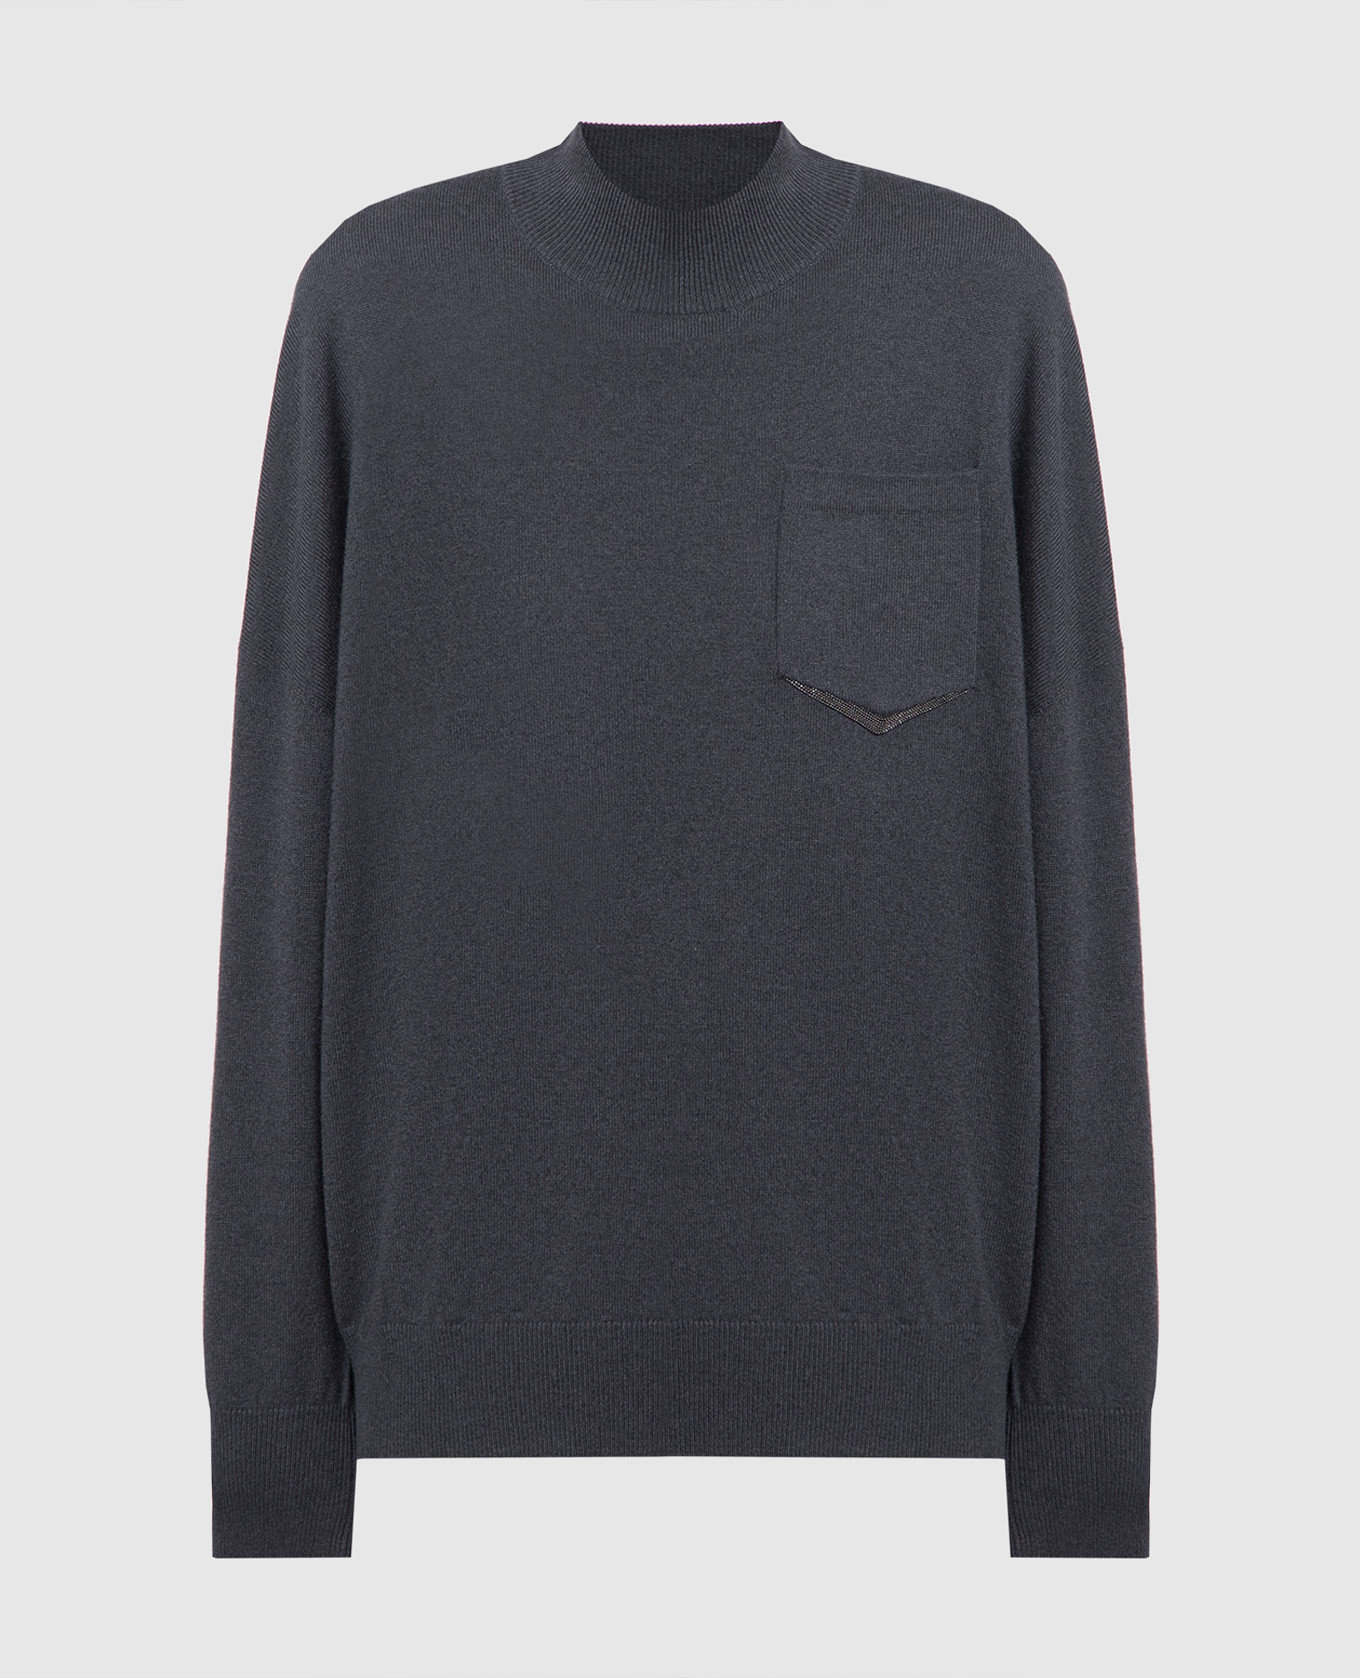 Gray cashmere sweater with monil chain